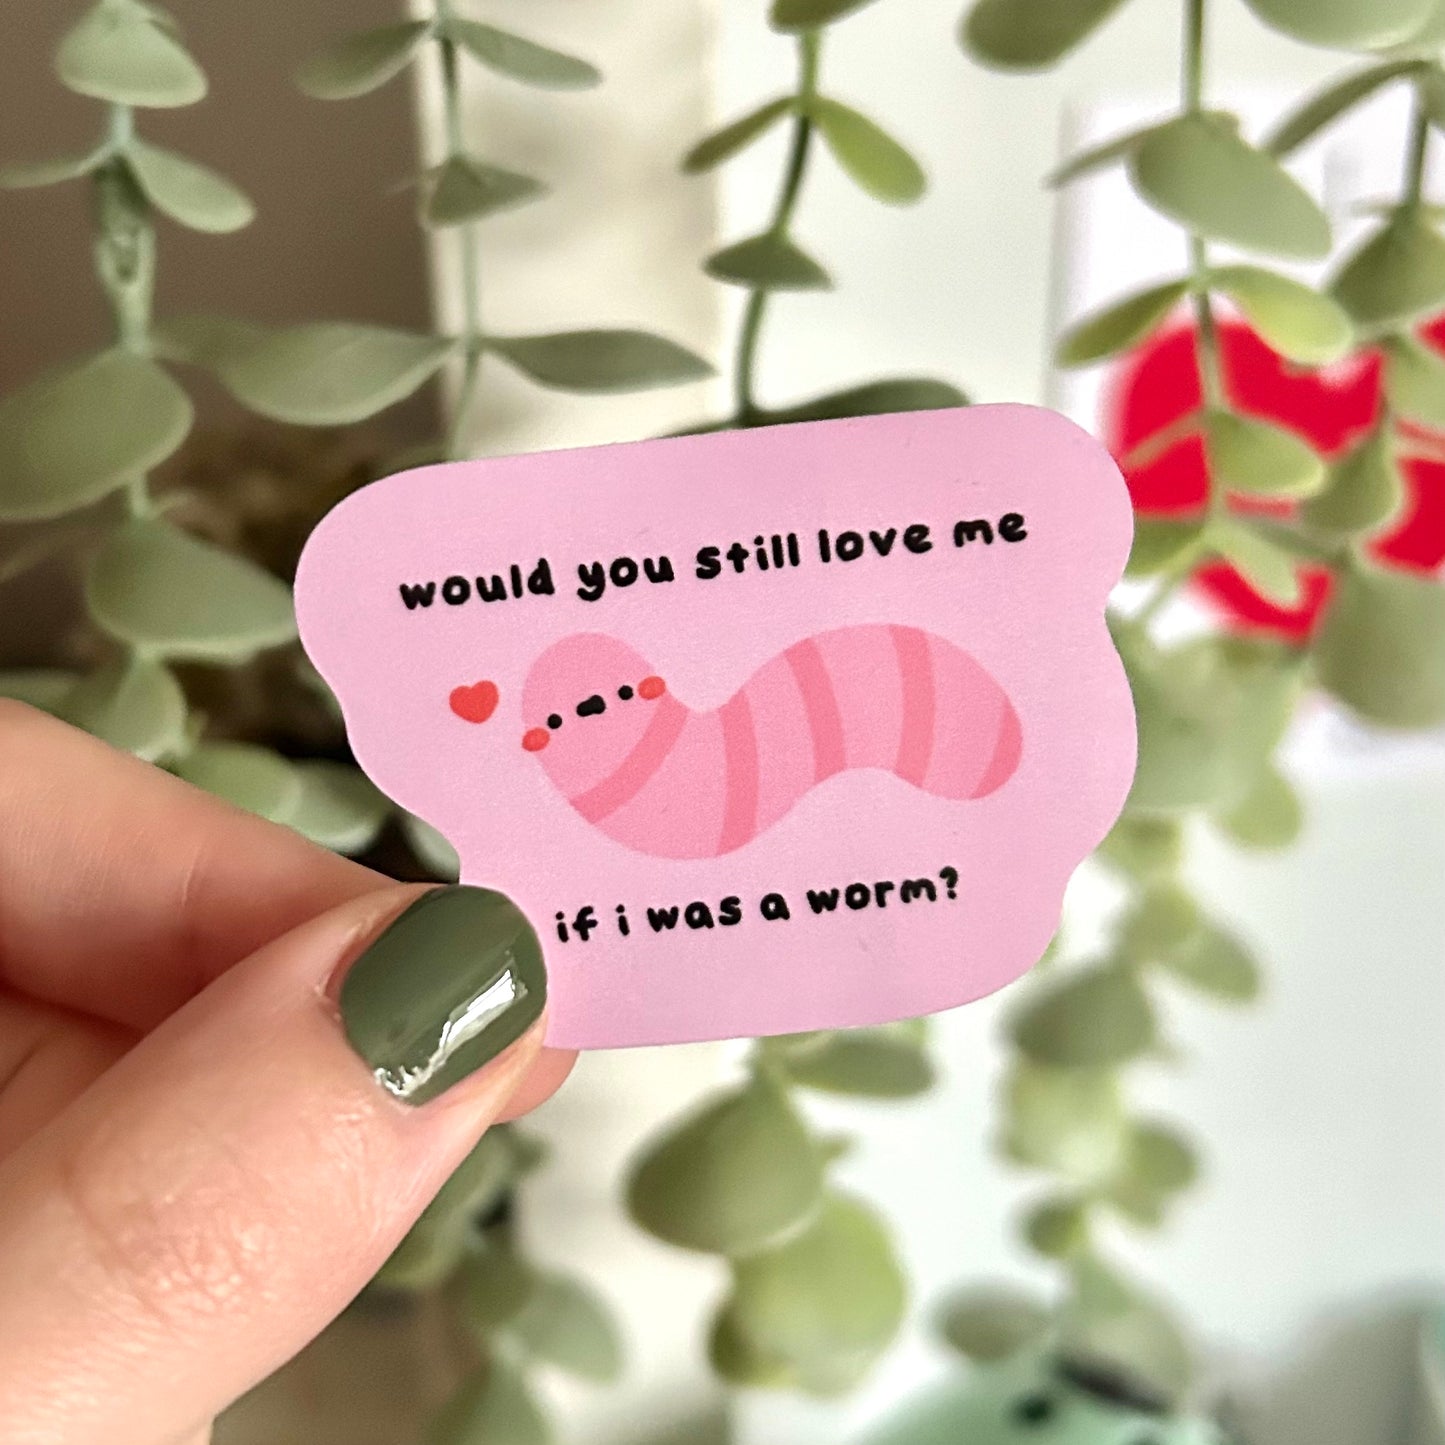 “Would you still love me if I was a worm?” Sticker